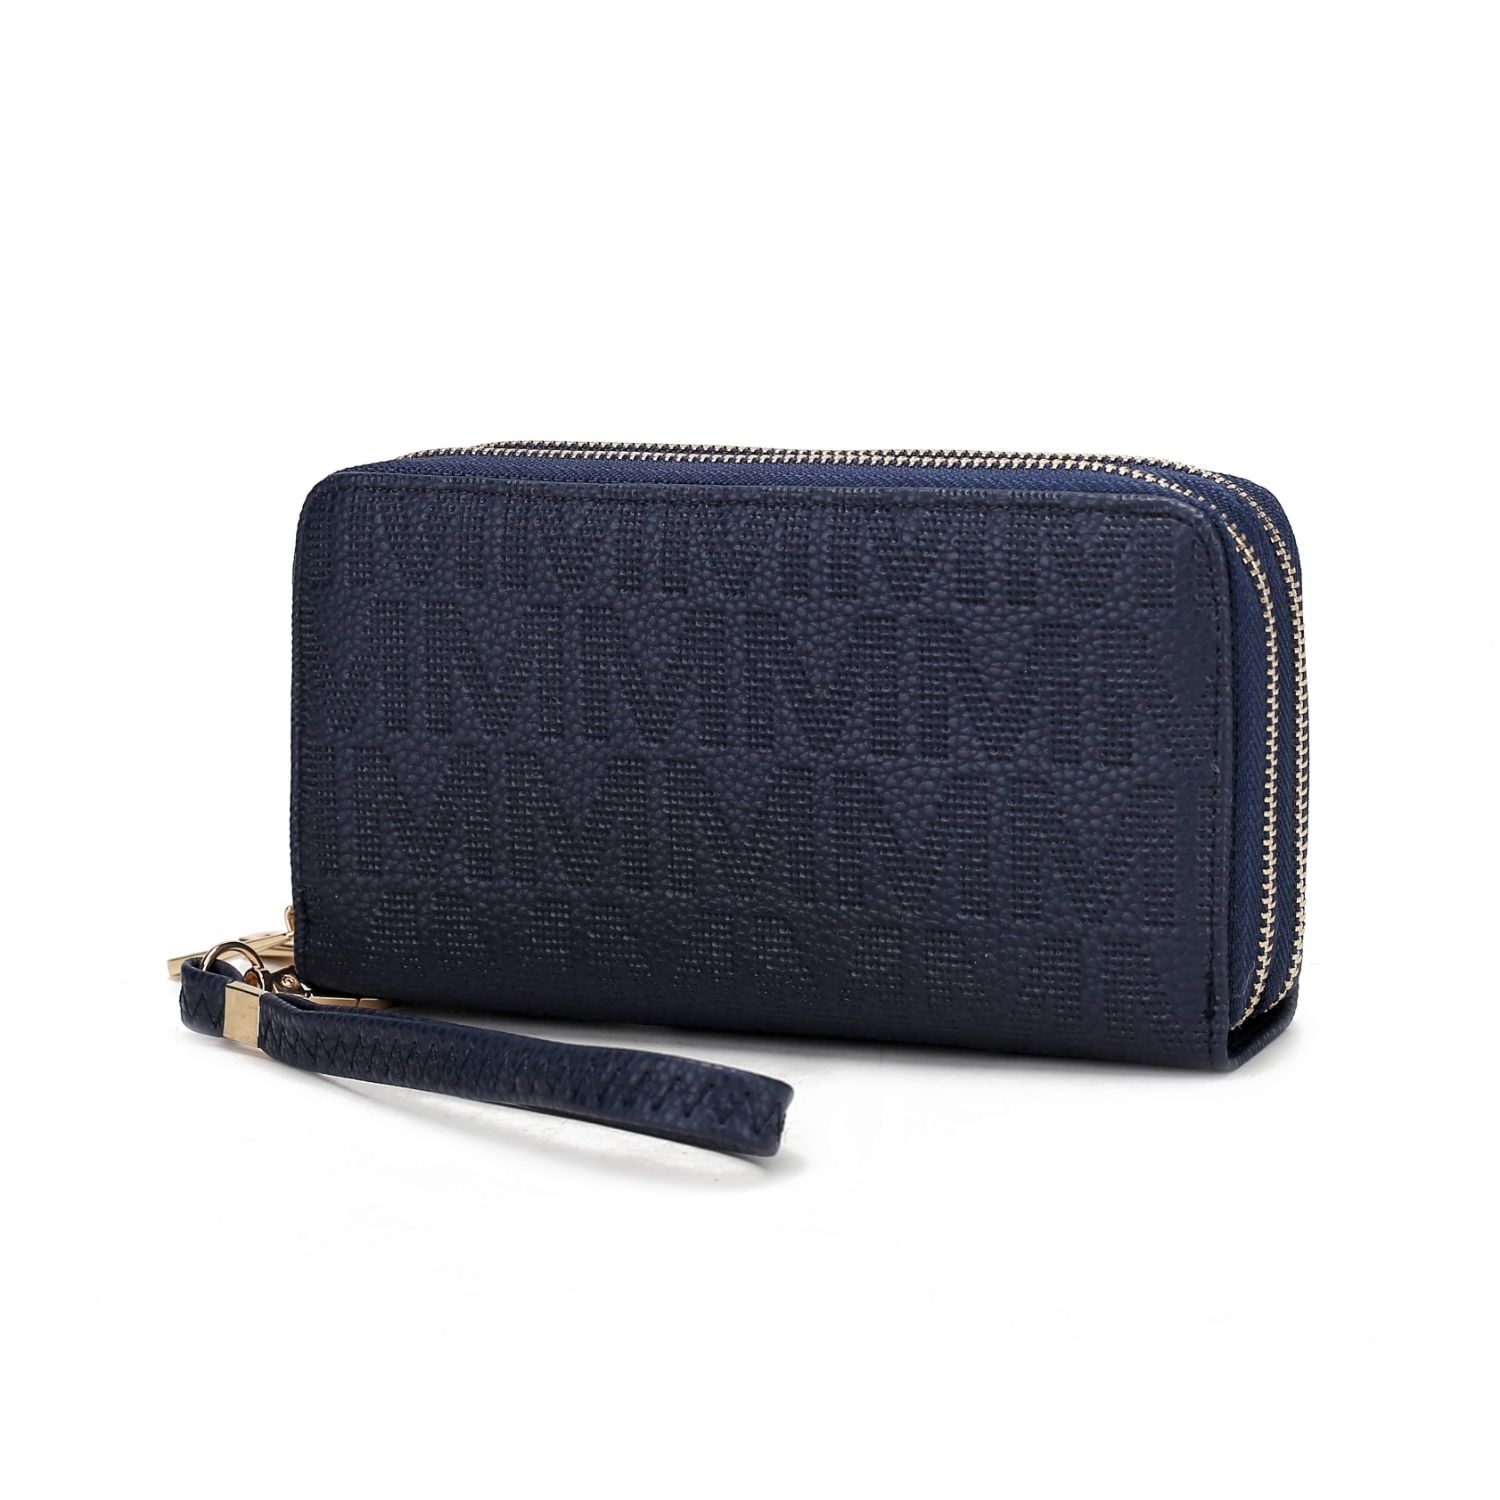 MKF Collection Lisbette Embossed M Signature Wallet By Mia K. Handbag - Navy